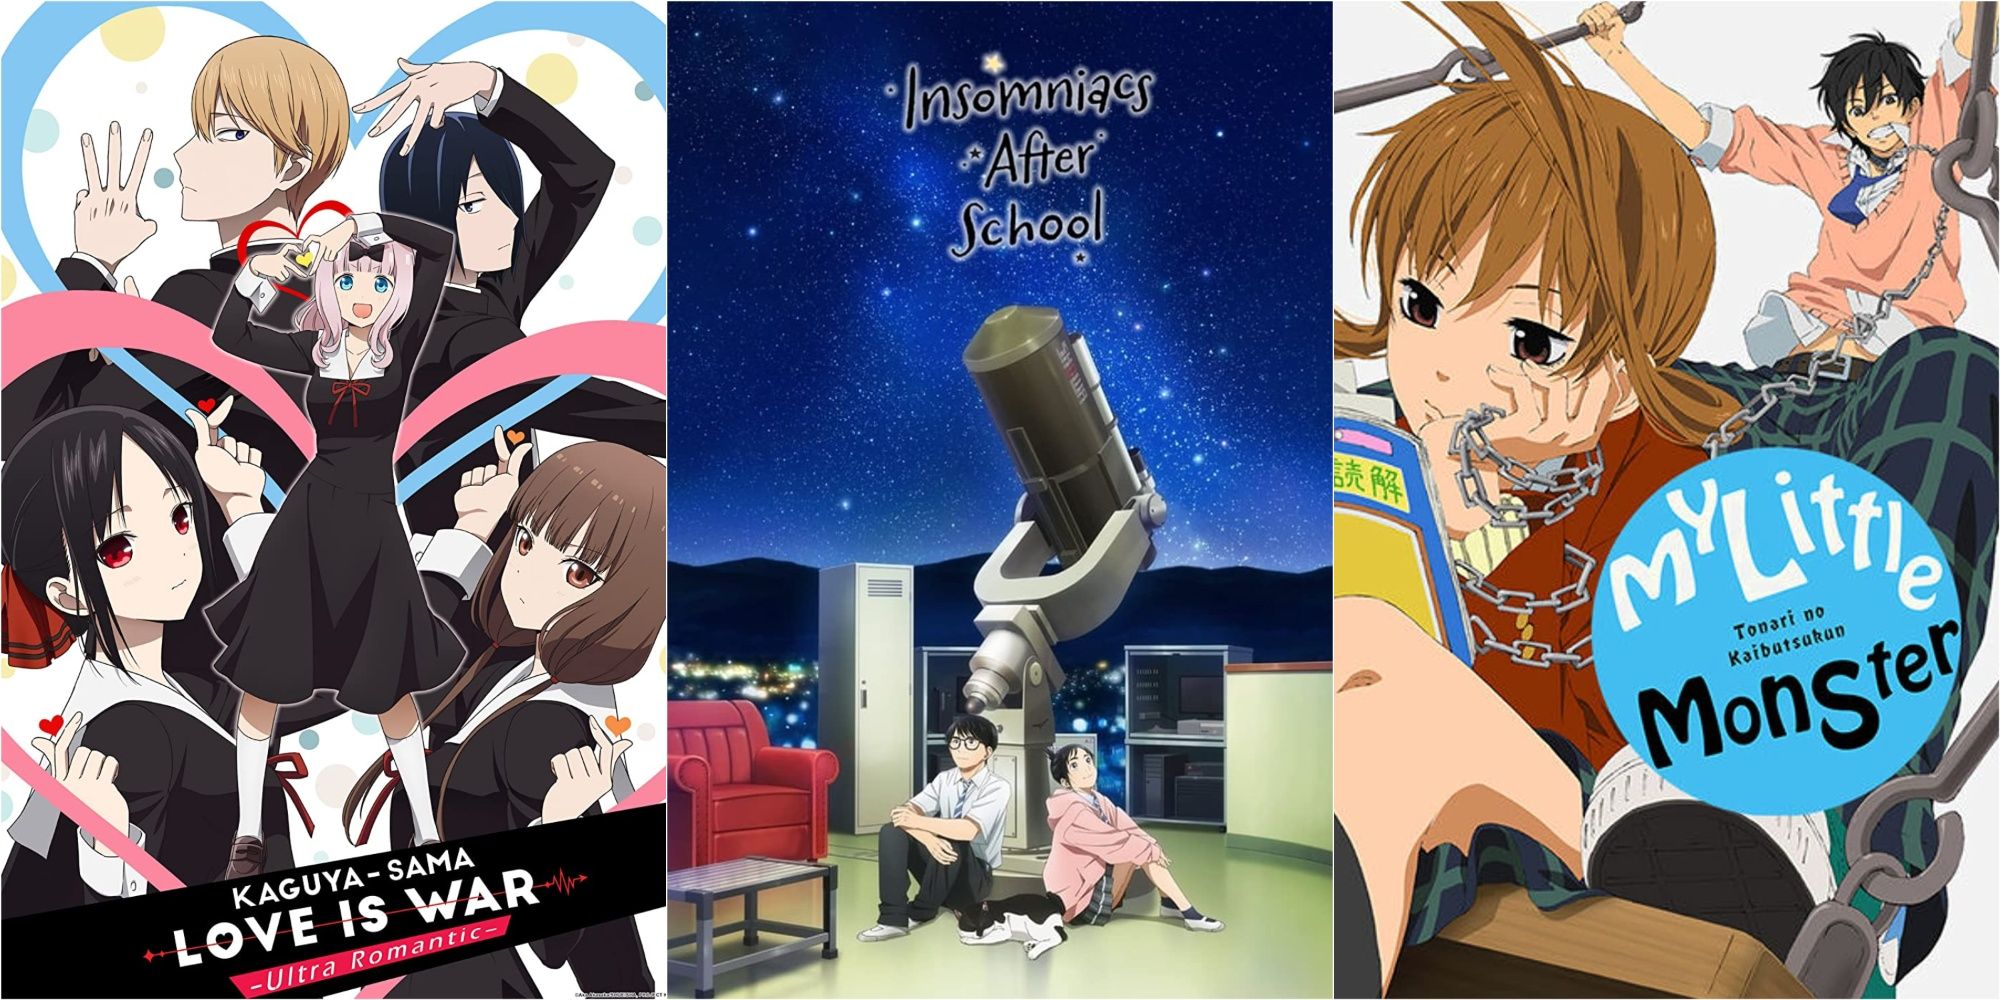 Best Romance Anime Like Insomniacs After School featured image